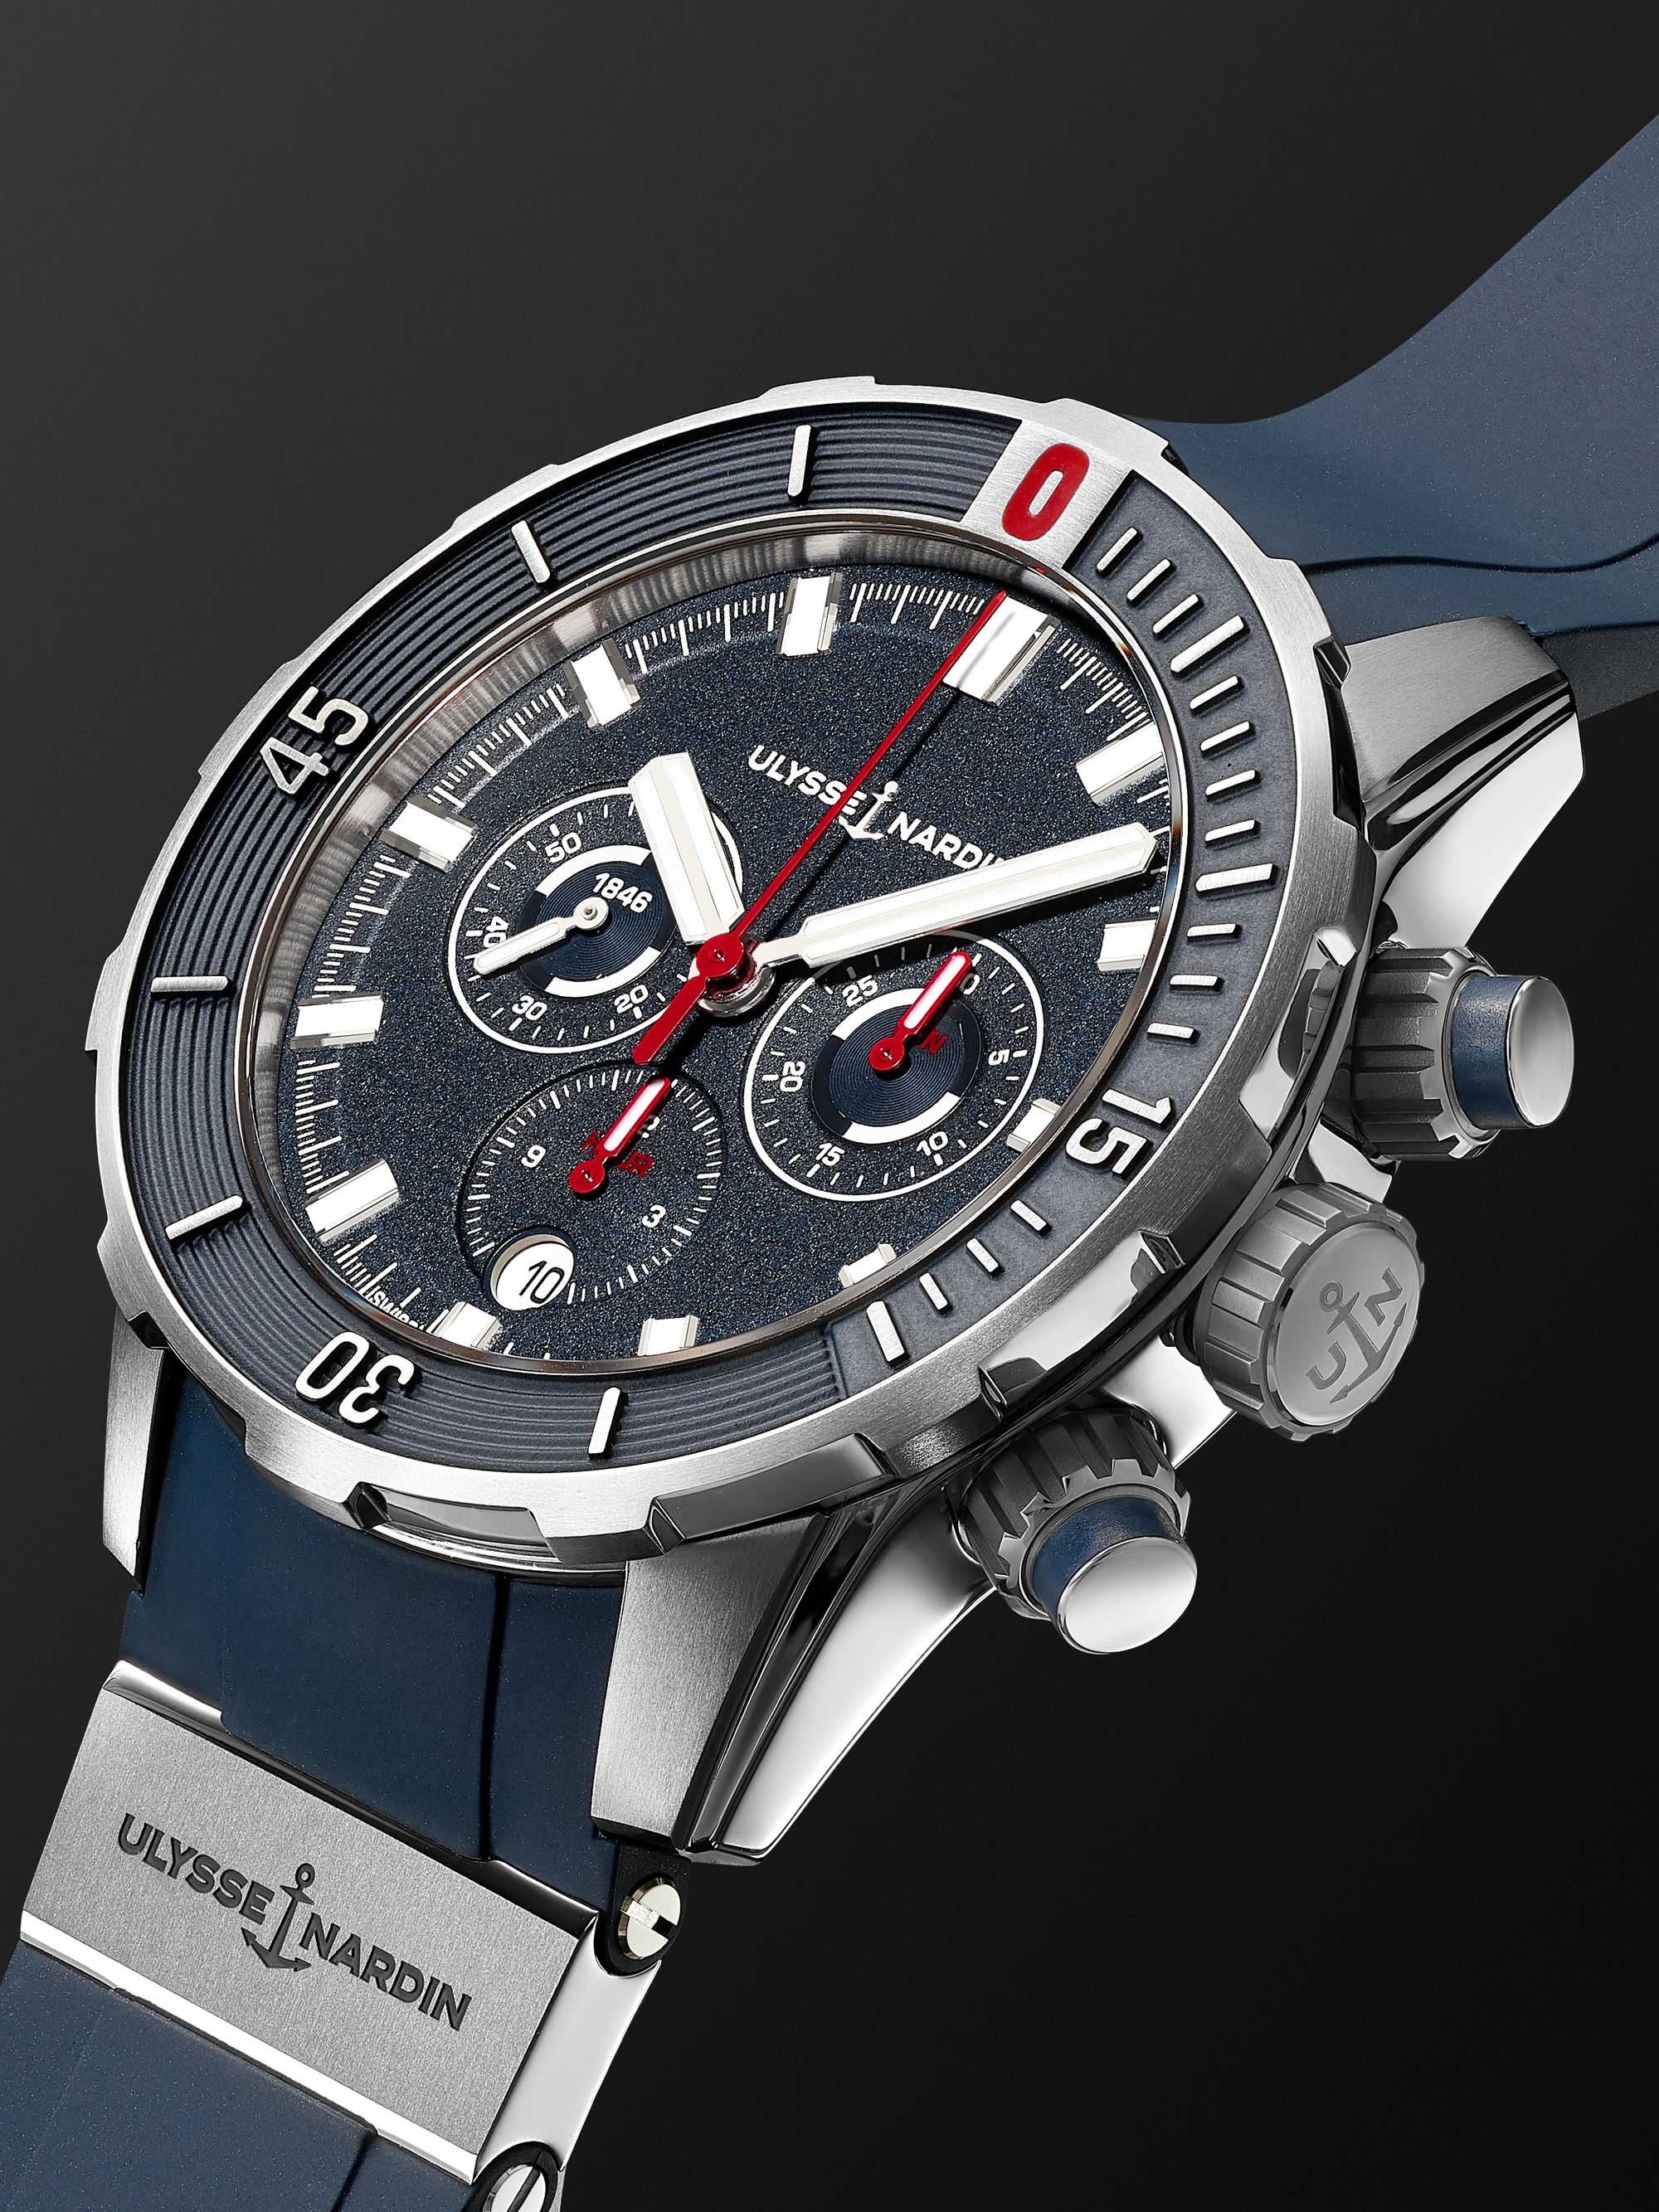 ULYSSE NARDIN Diver Automatic Chronograph 44mm Titanium and Rubber Watch, Ref. No. 1503-170-3/93